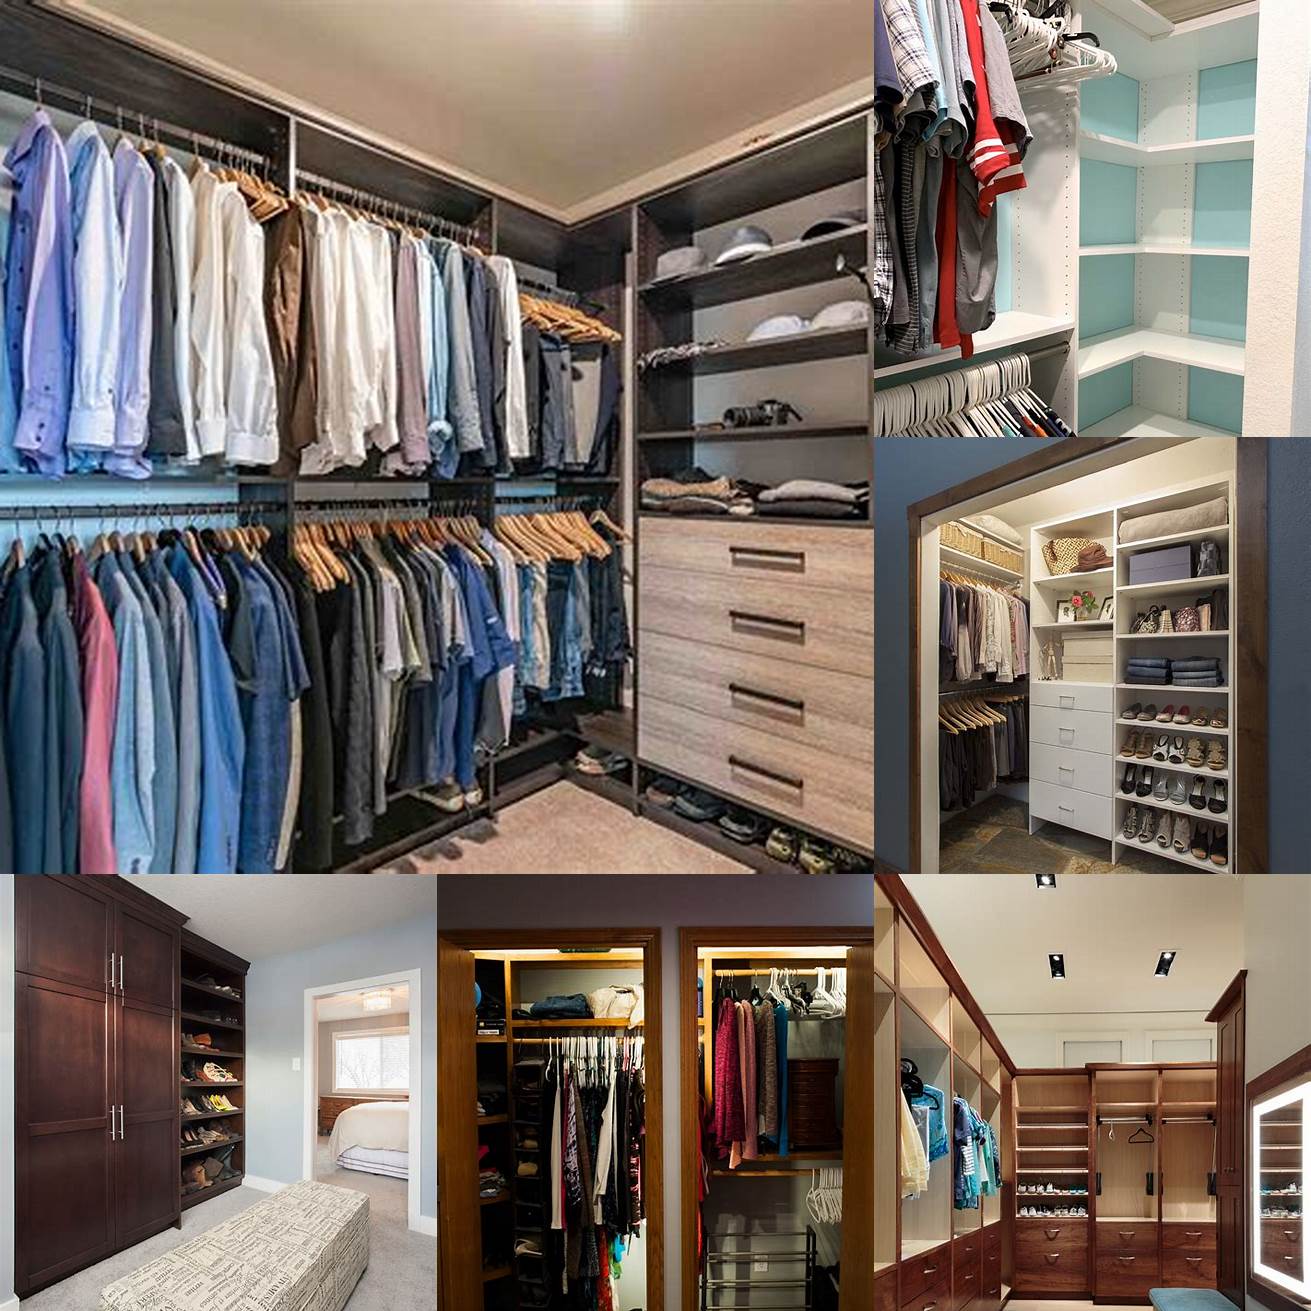 5 Increased home value Adding closet furniture to your space can increase its overall value and appeal to potential buyers